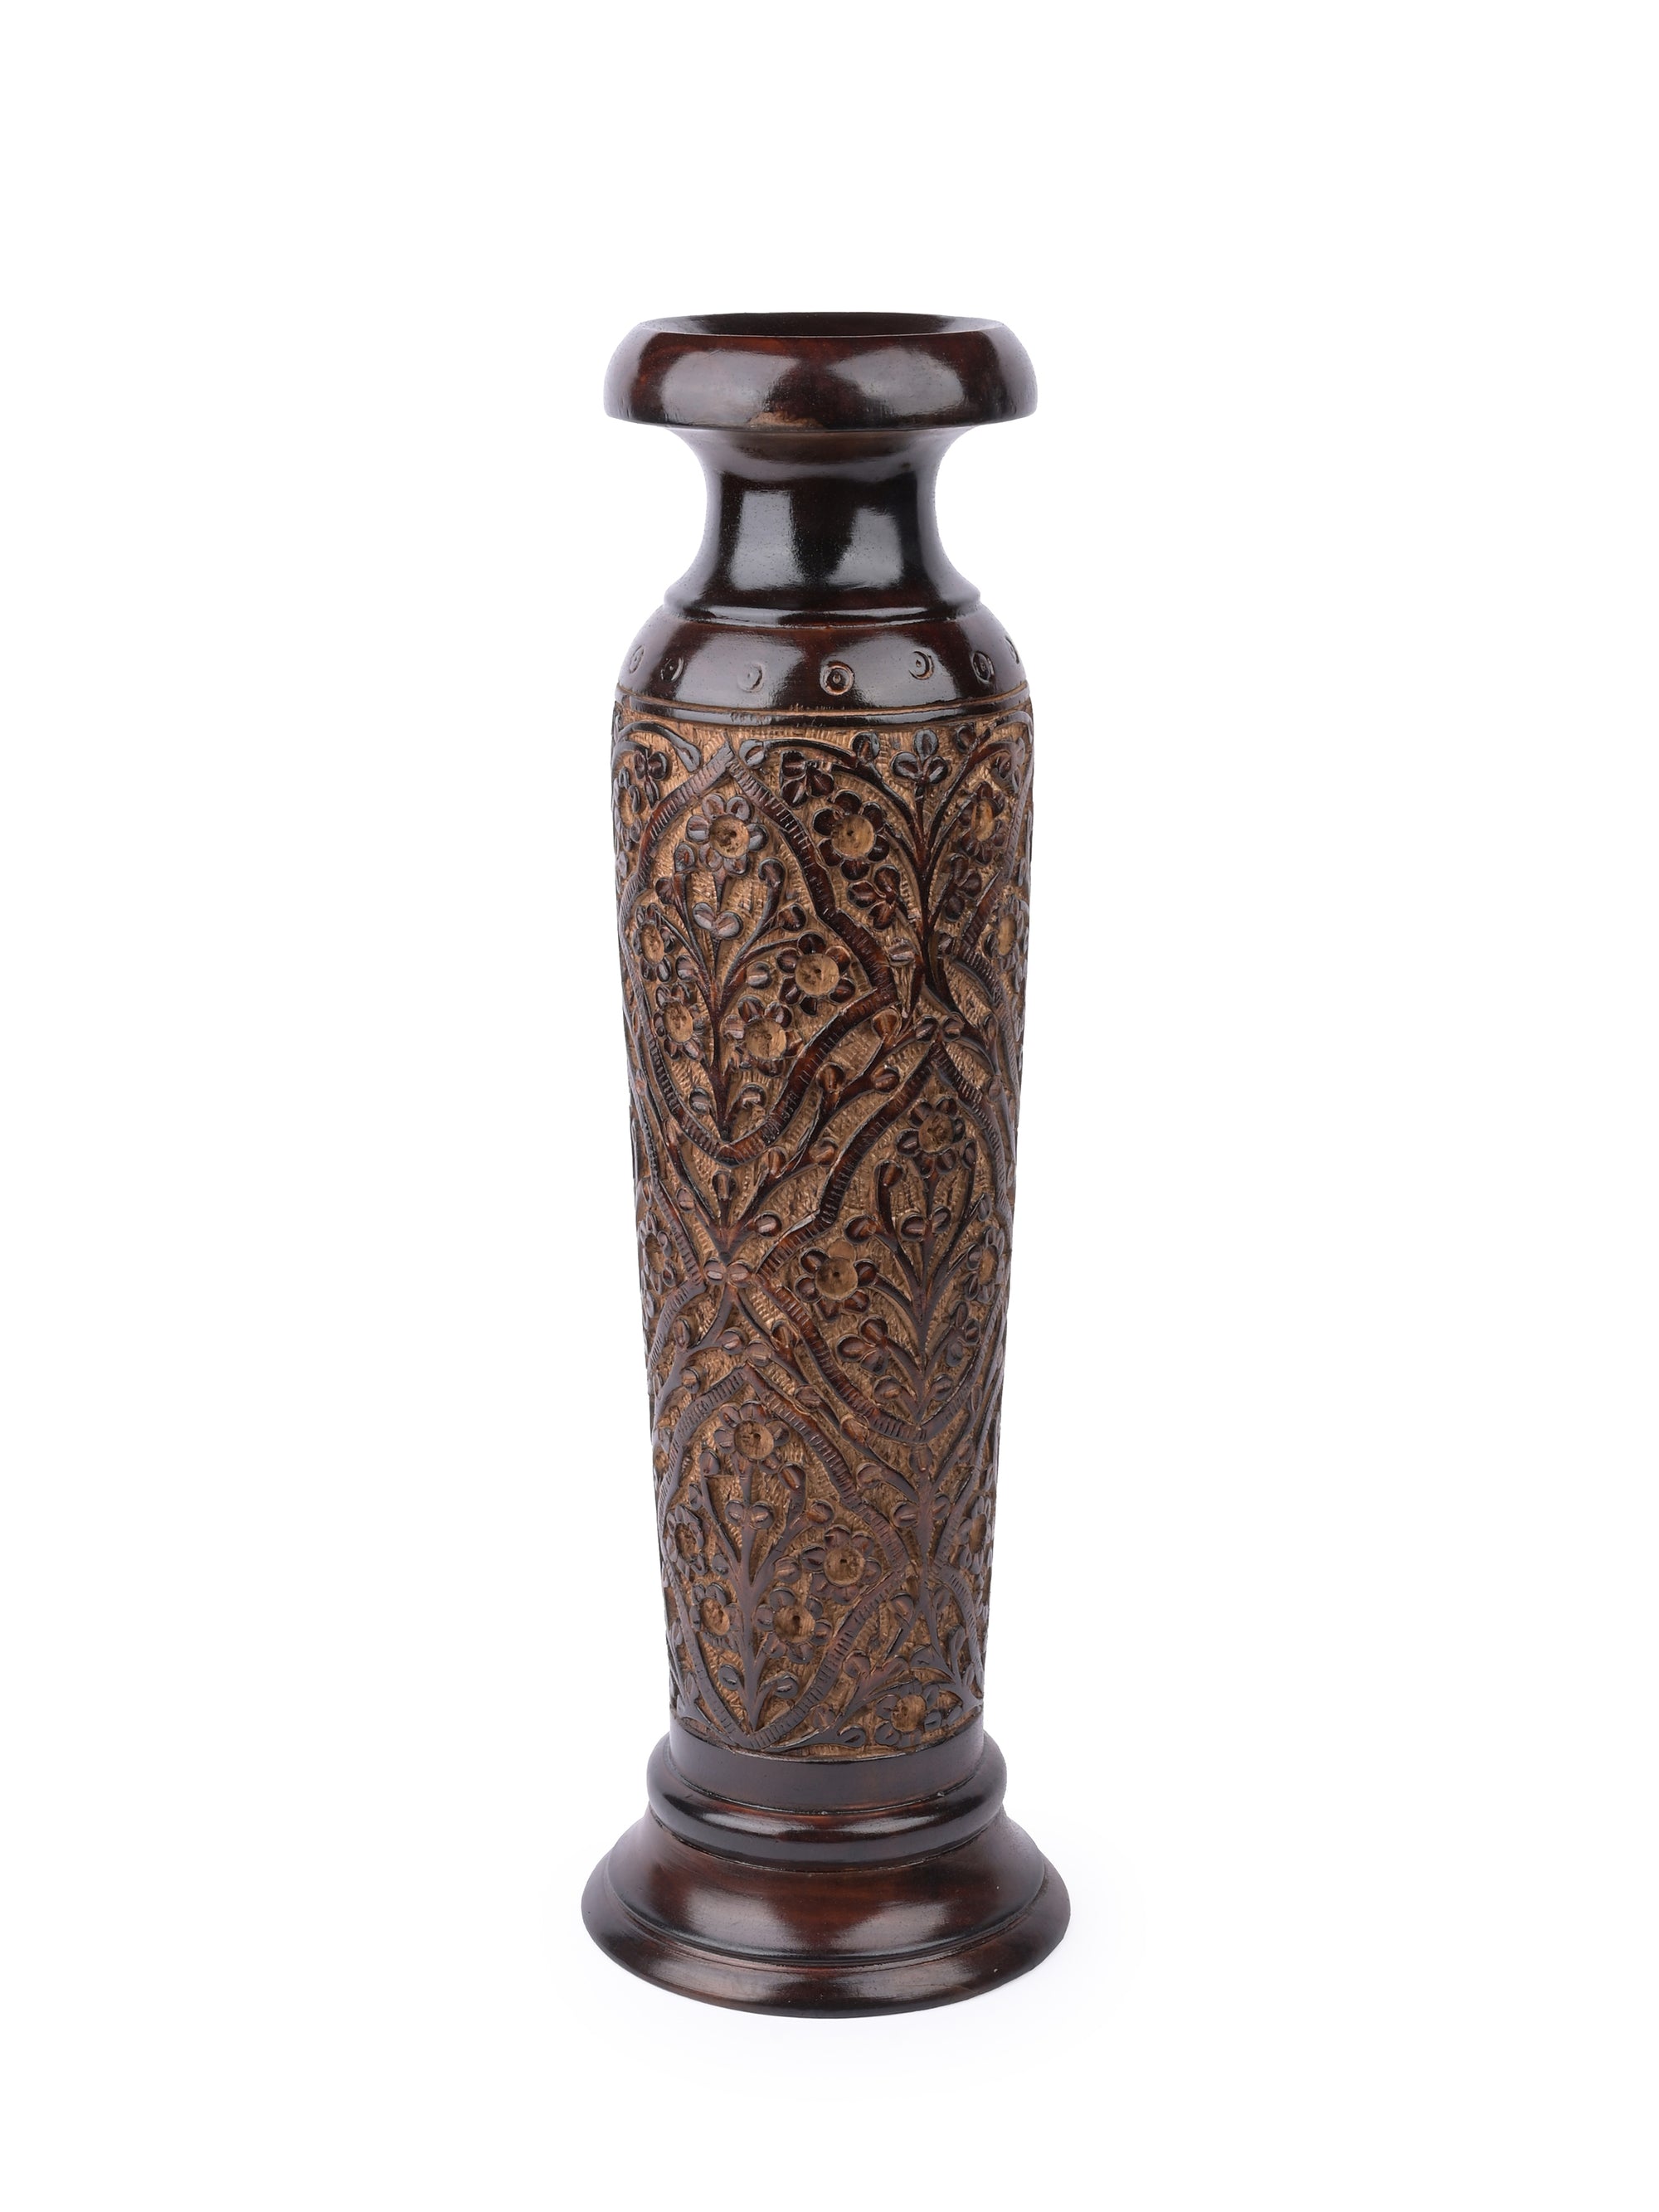 Wood crafted Tall Flower Vase - 20 inches in height - The Heritage Artifacts